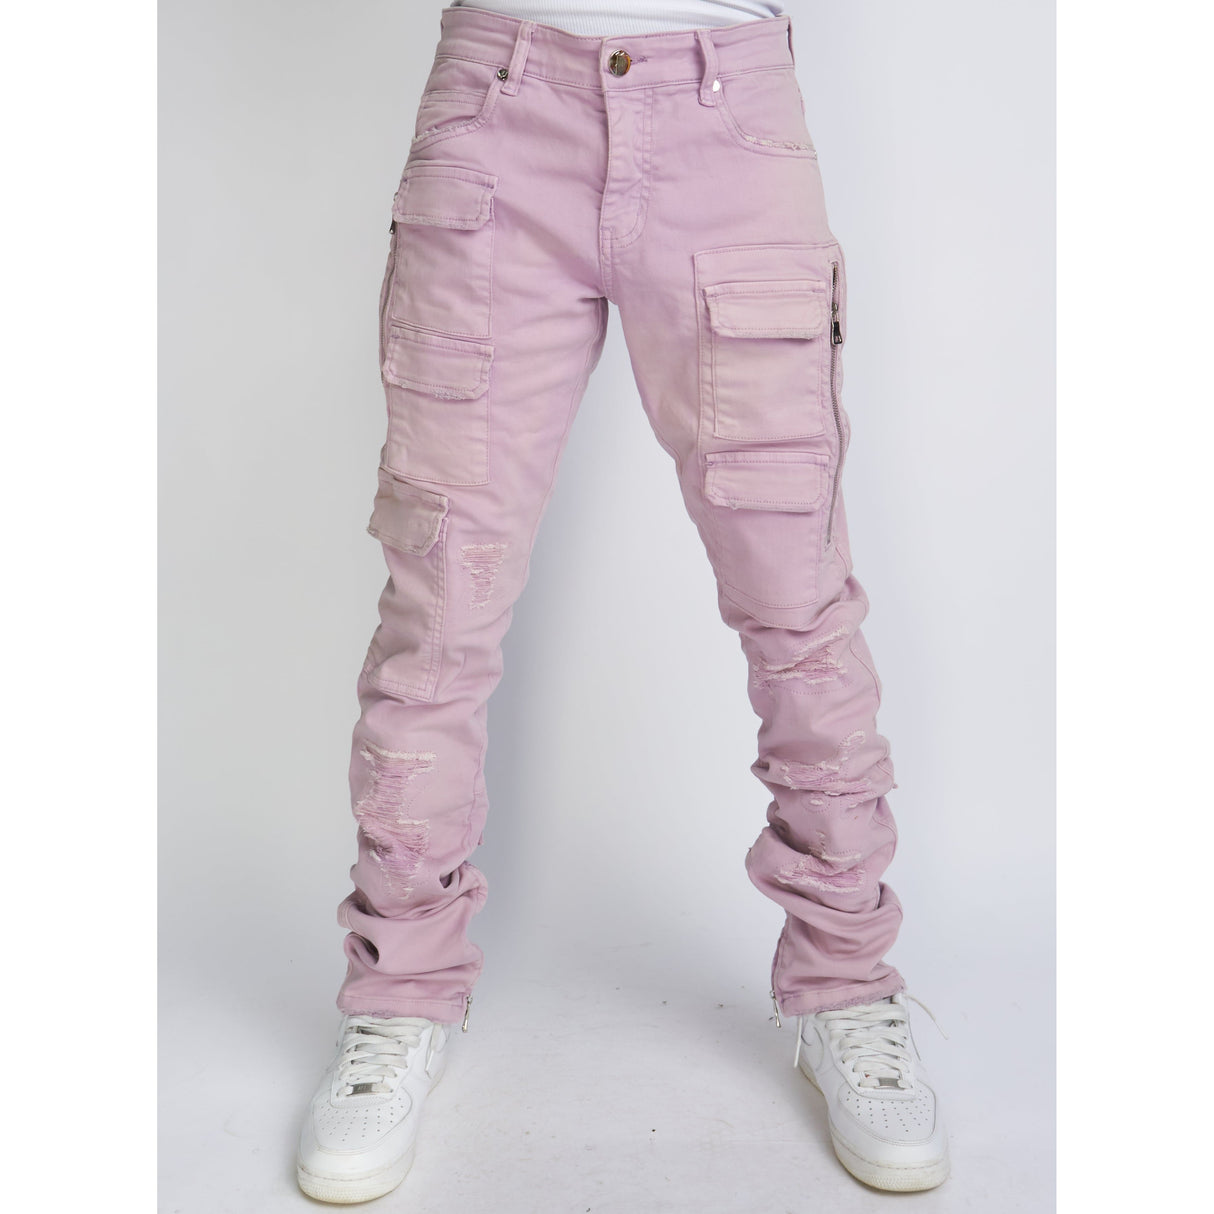 Politics Jeans - Skinny Stacked Cargo - Lavender  - Murphy509